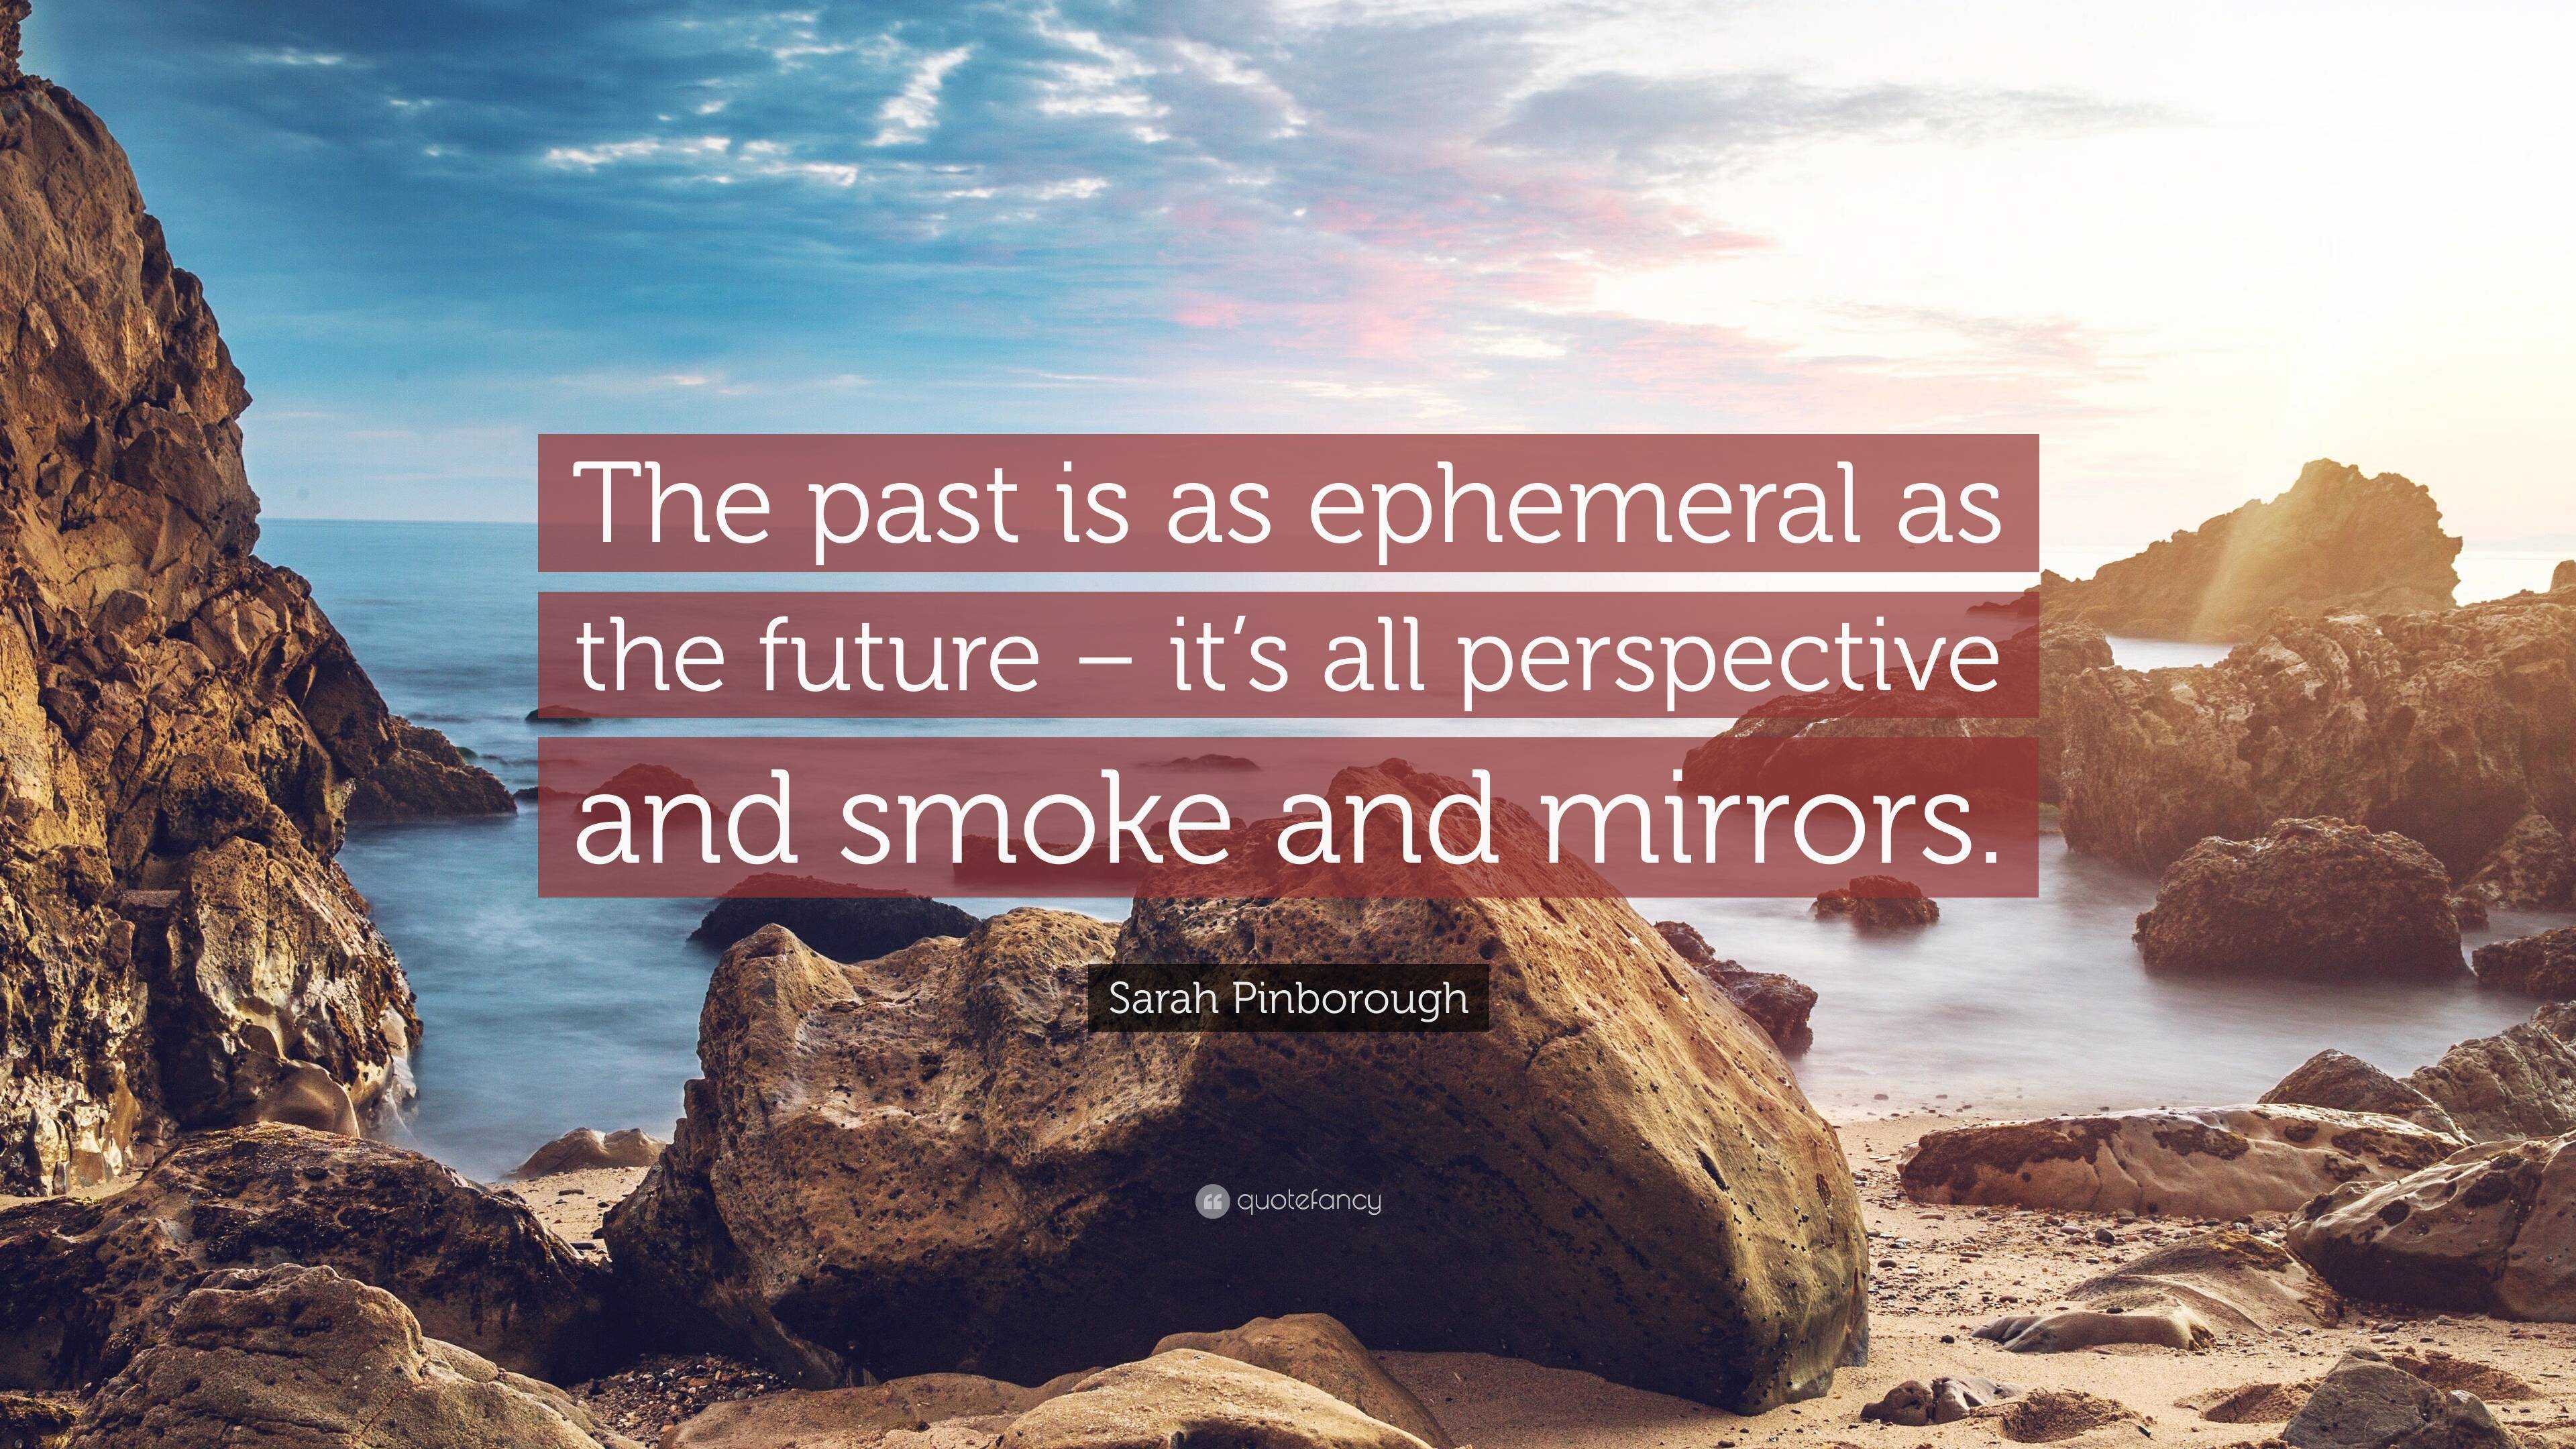 Sarah Pinborough Quote: “The past is as ephemeral as the future – it’s ...